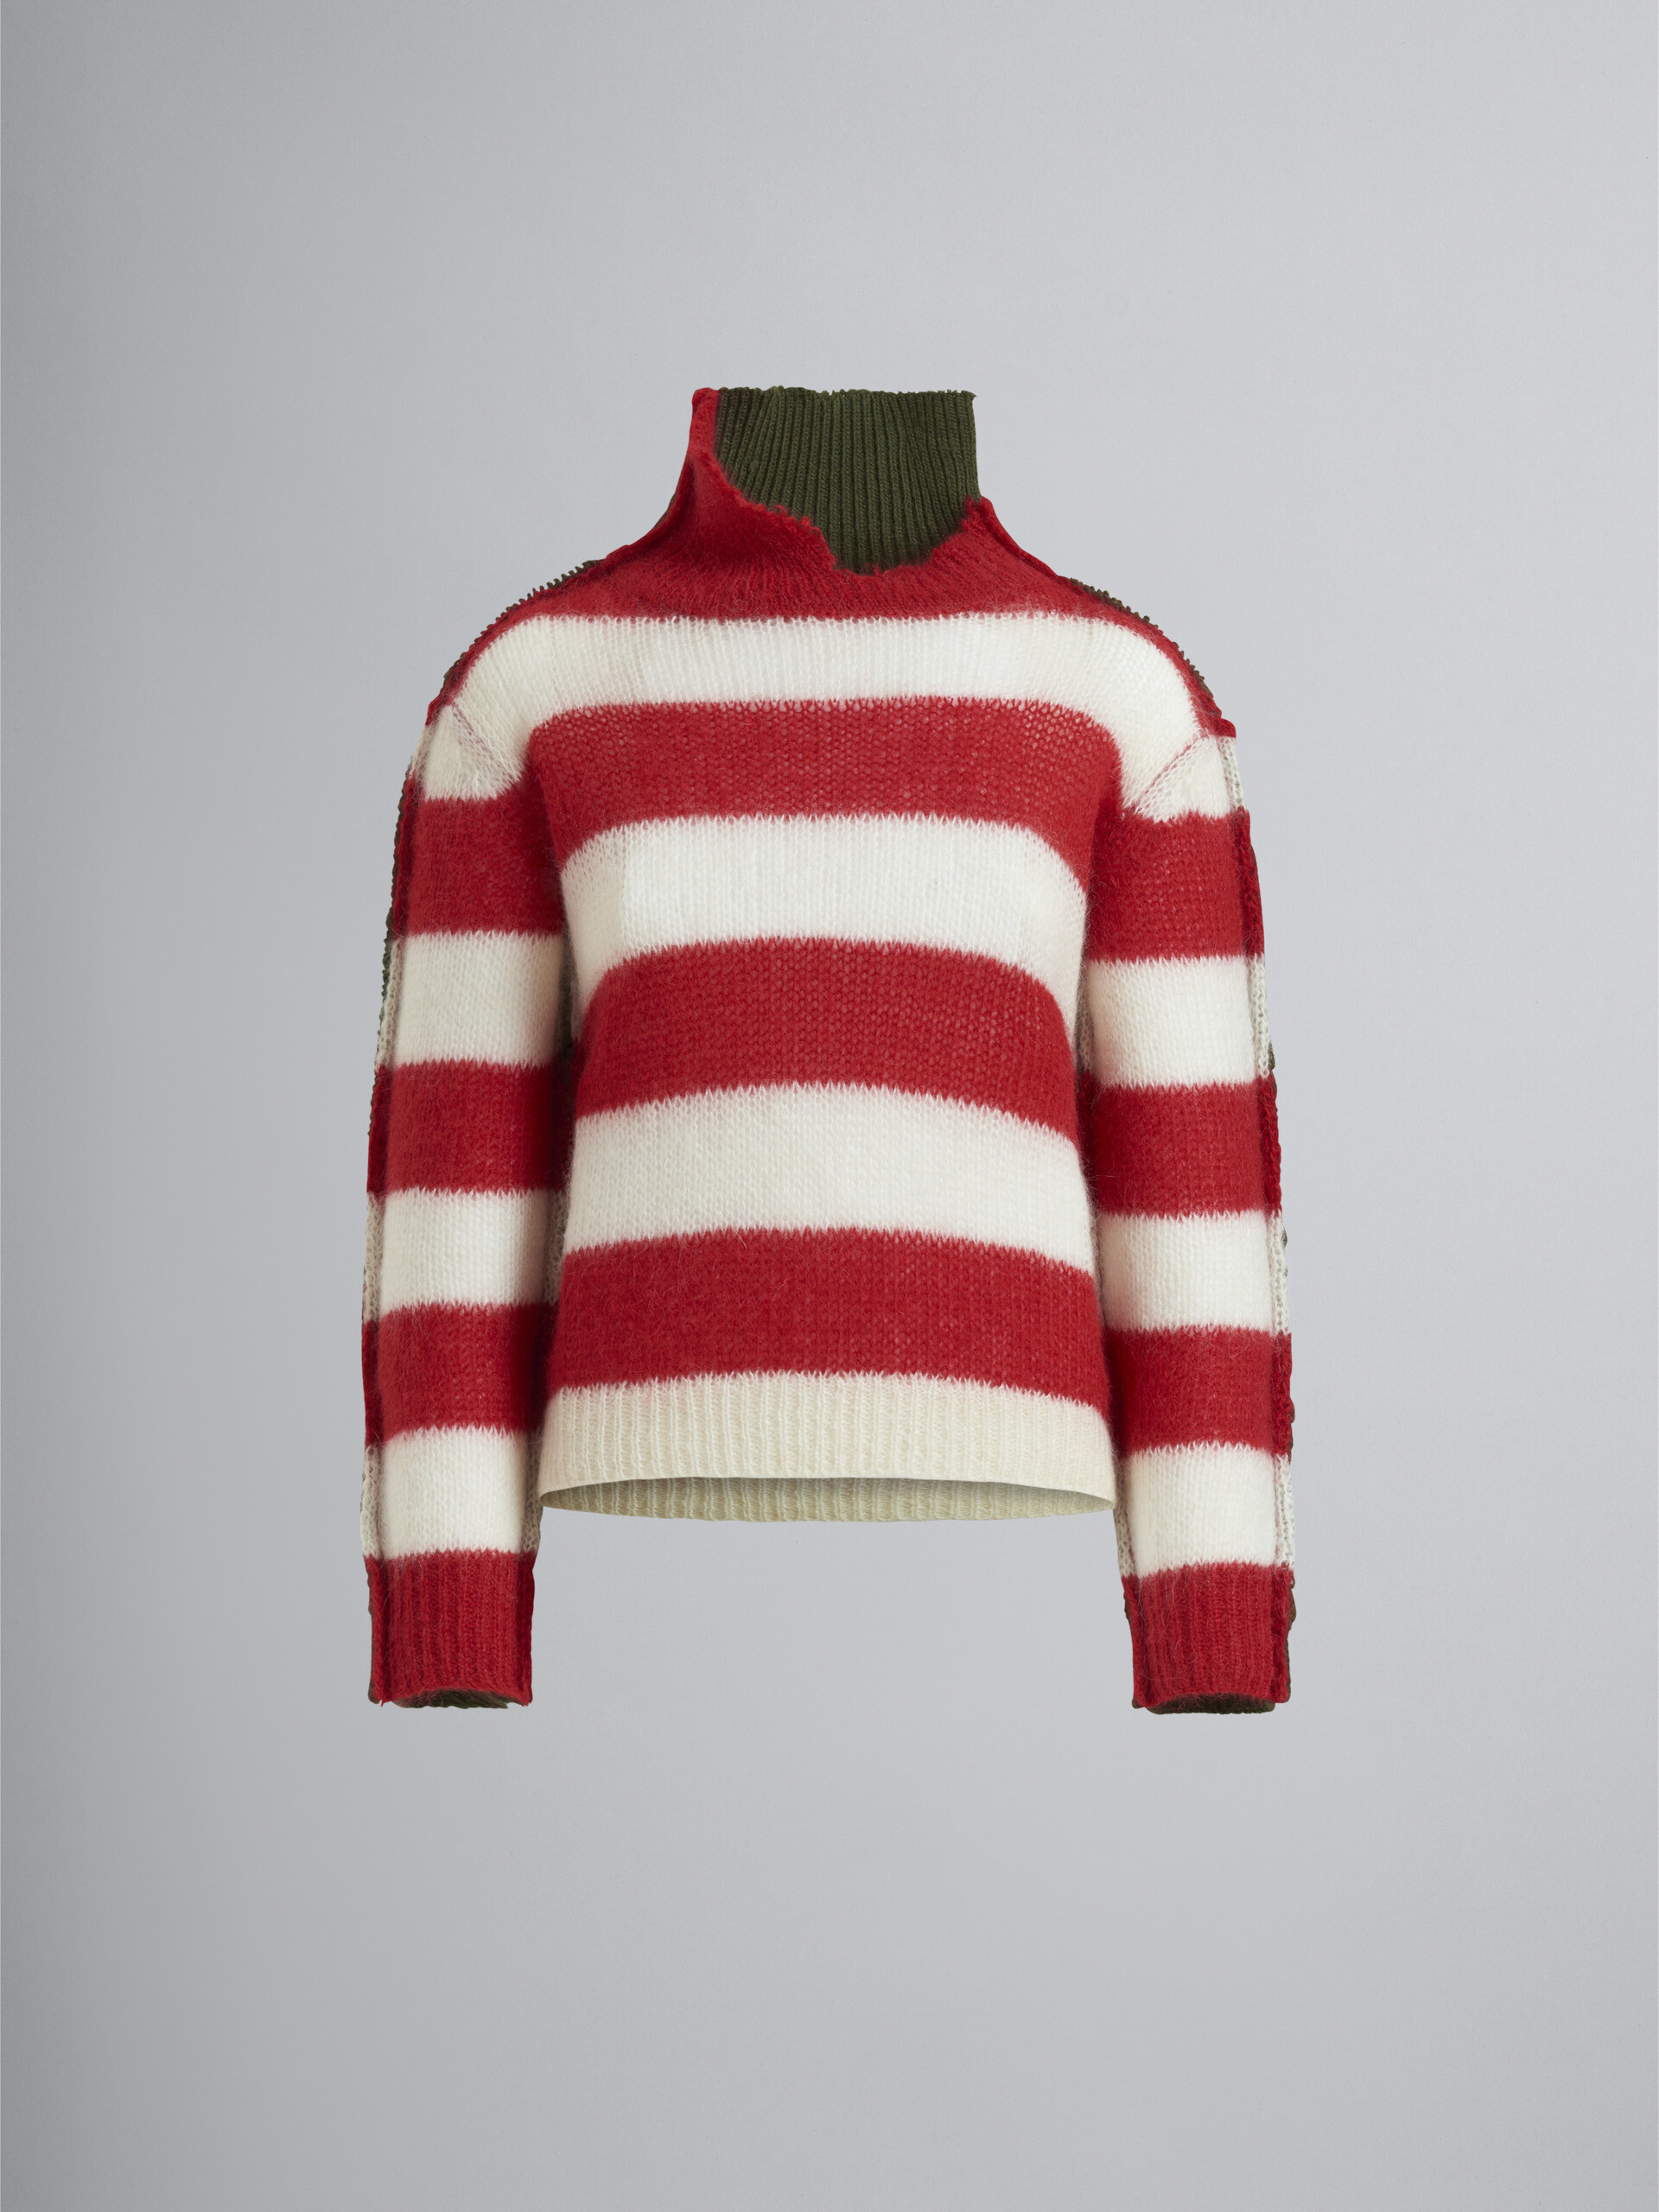 Striped wool and mohair turtleneck sweater - Pullovers - Image 1